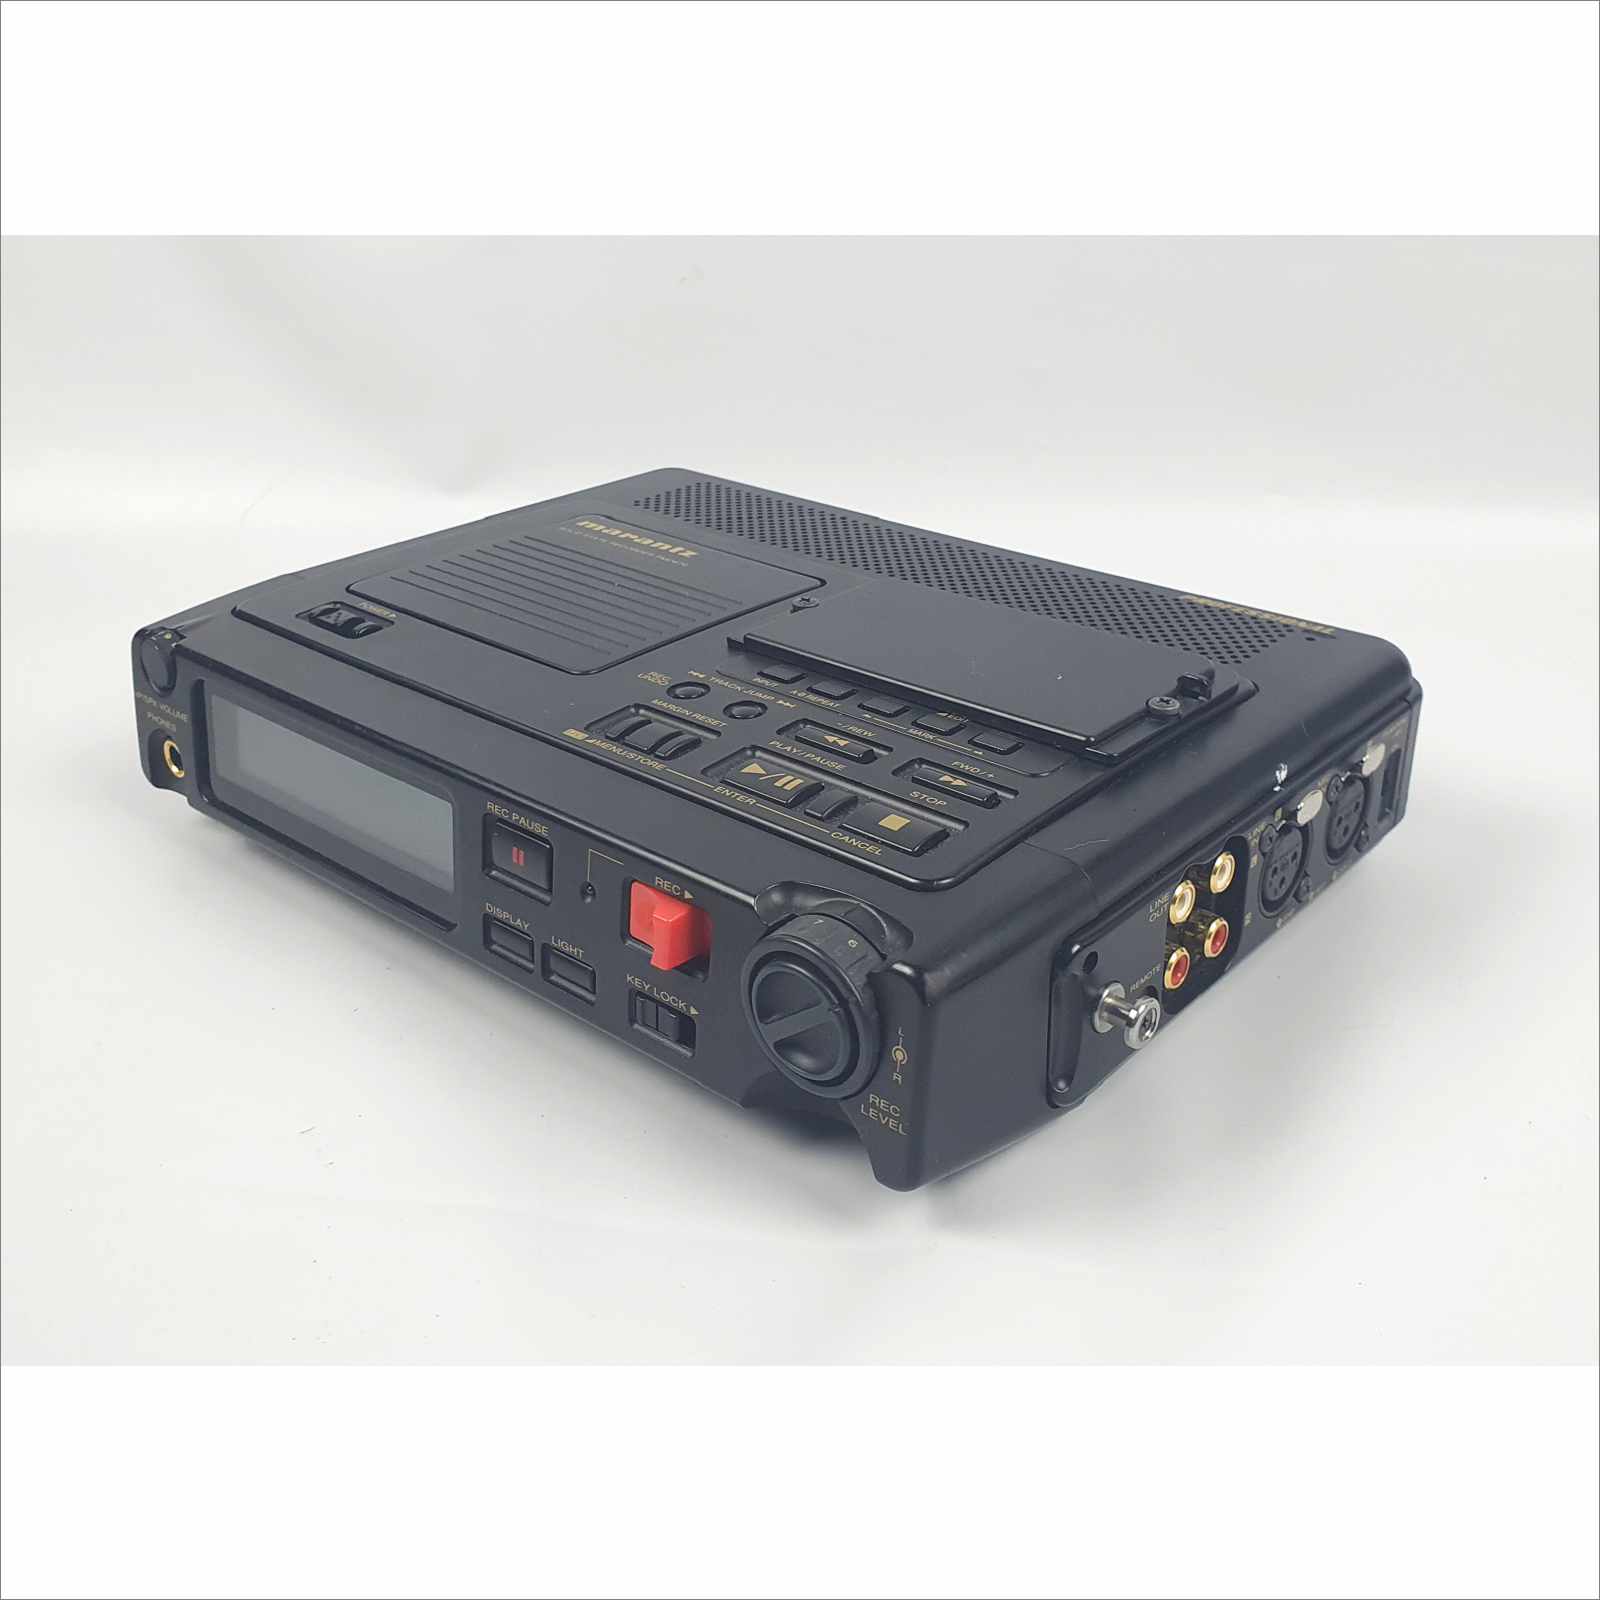 Concentratie ontsmettingsmiddel afschaffen Marantz PMD670 Portable Compact Field Meeting Pro Audio Recorder W/ 512MB  Card, Case and More - Computer | Network | Telecom | Lab & medical Equipment